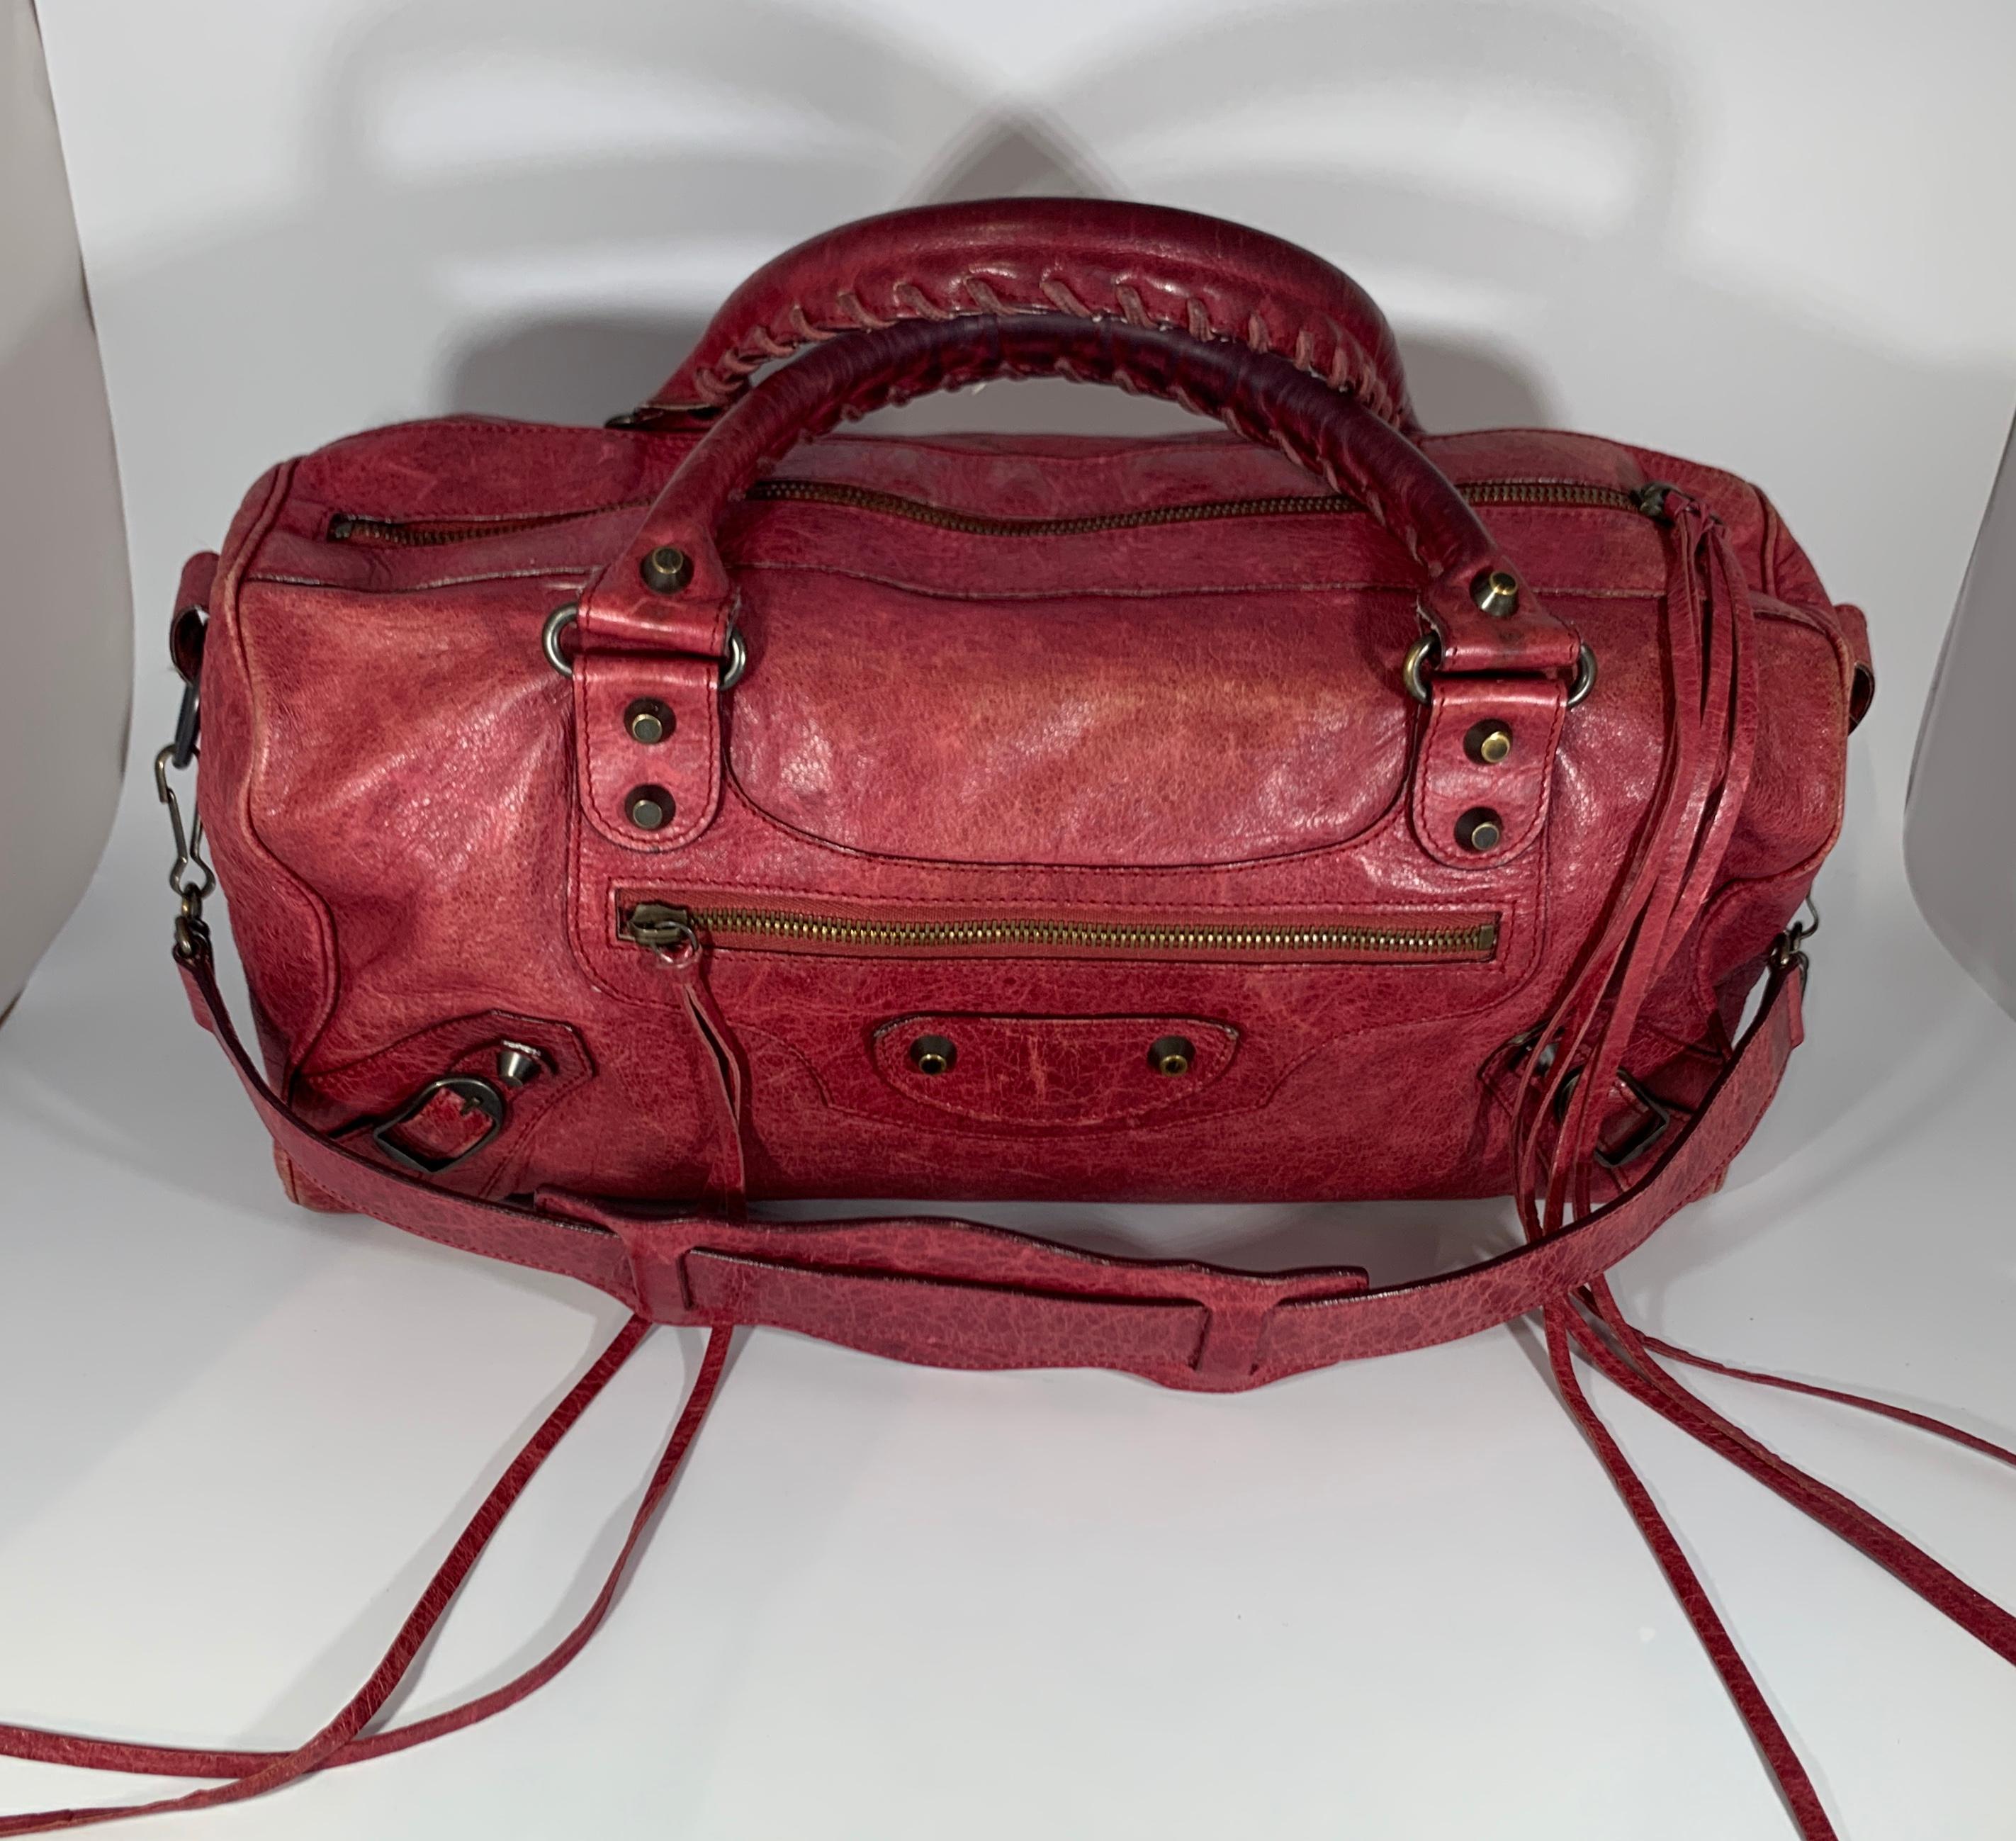 
An indispensable dresser accessory, this Balenciaga bag is surely a must have. Complement with red colour, this classy bag is all you need to flaunt your style this season. This leather bag is the first class pick for all your essentials.
The House